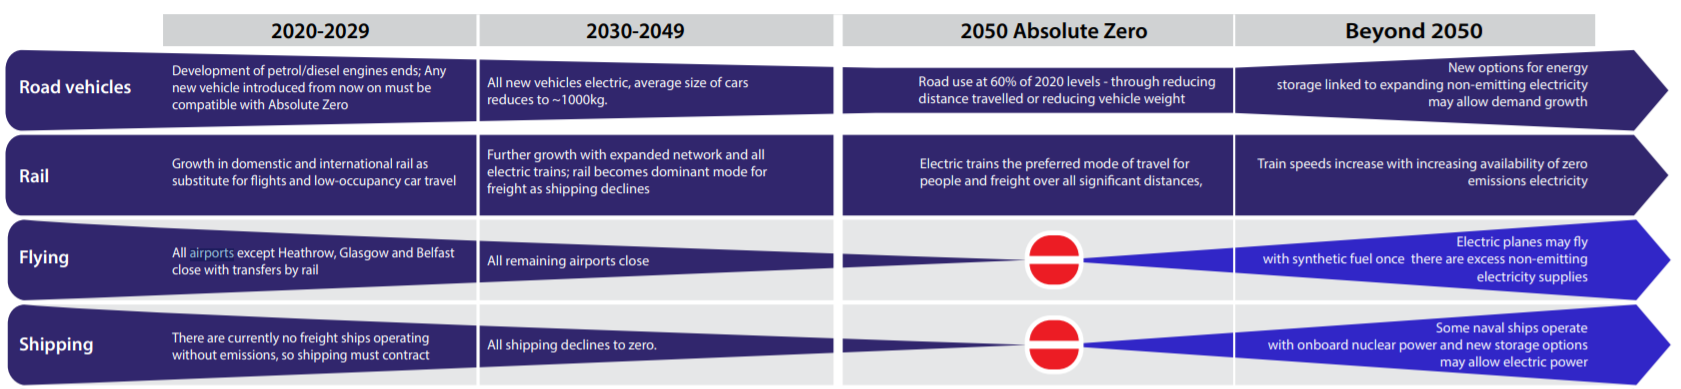 Table showing how transport must change to achieve absolute zero by 2050 (Image: Absolute Zero report)